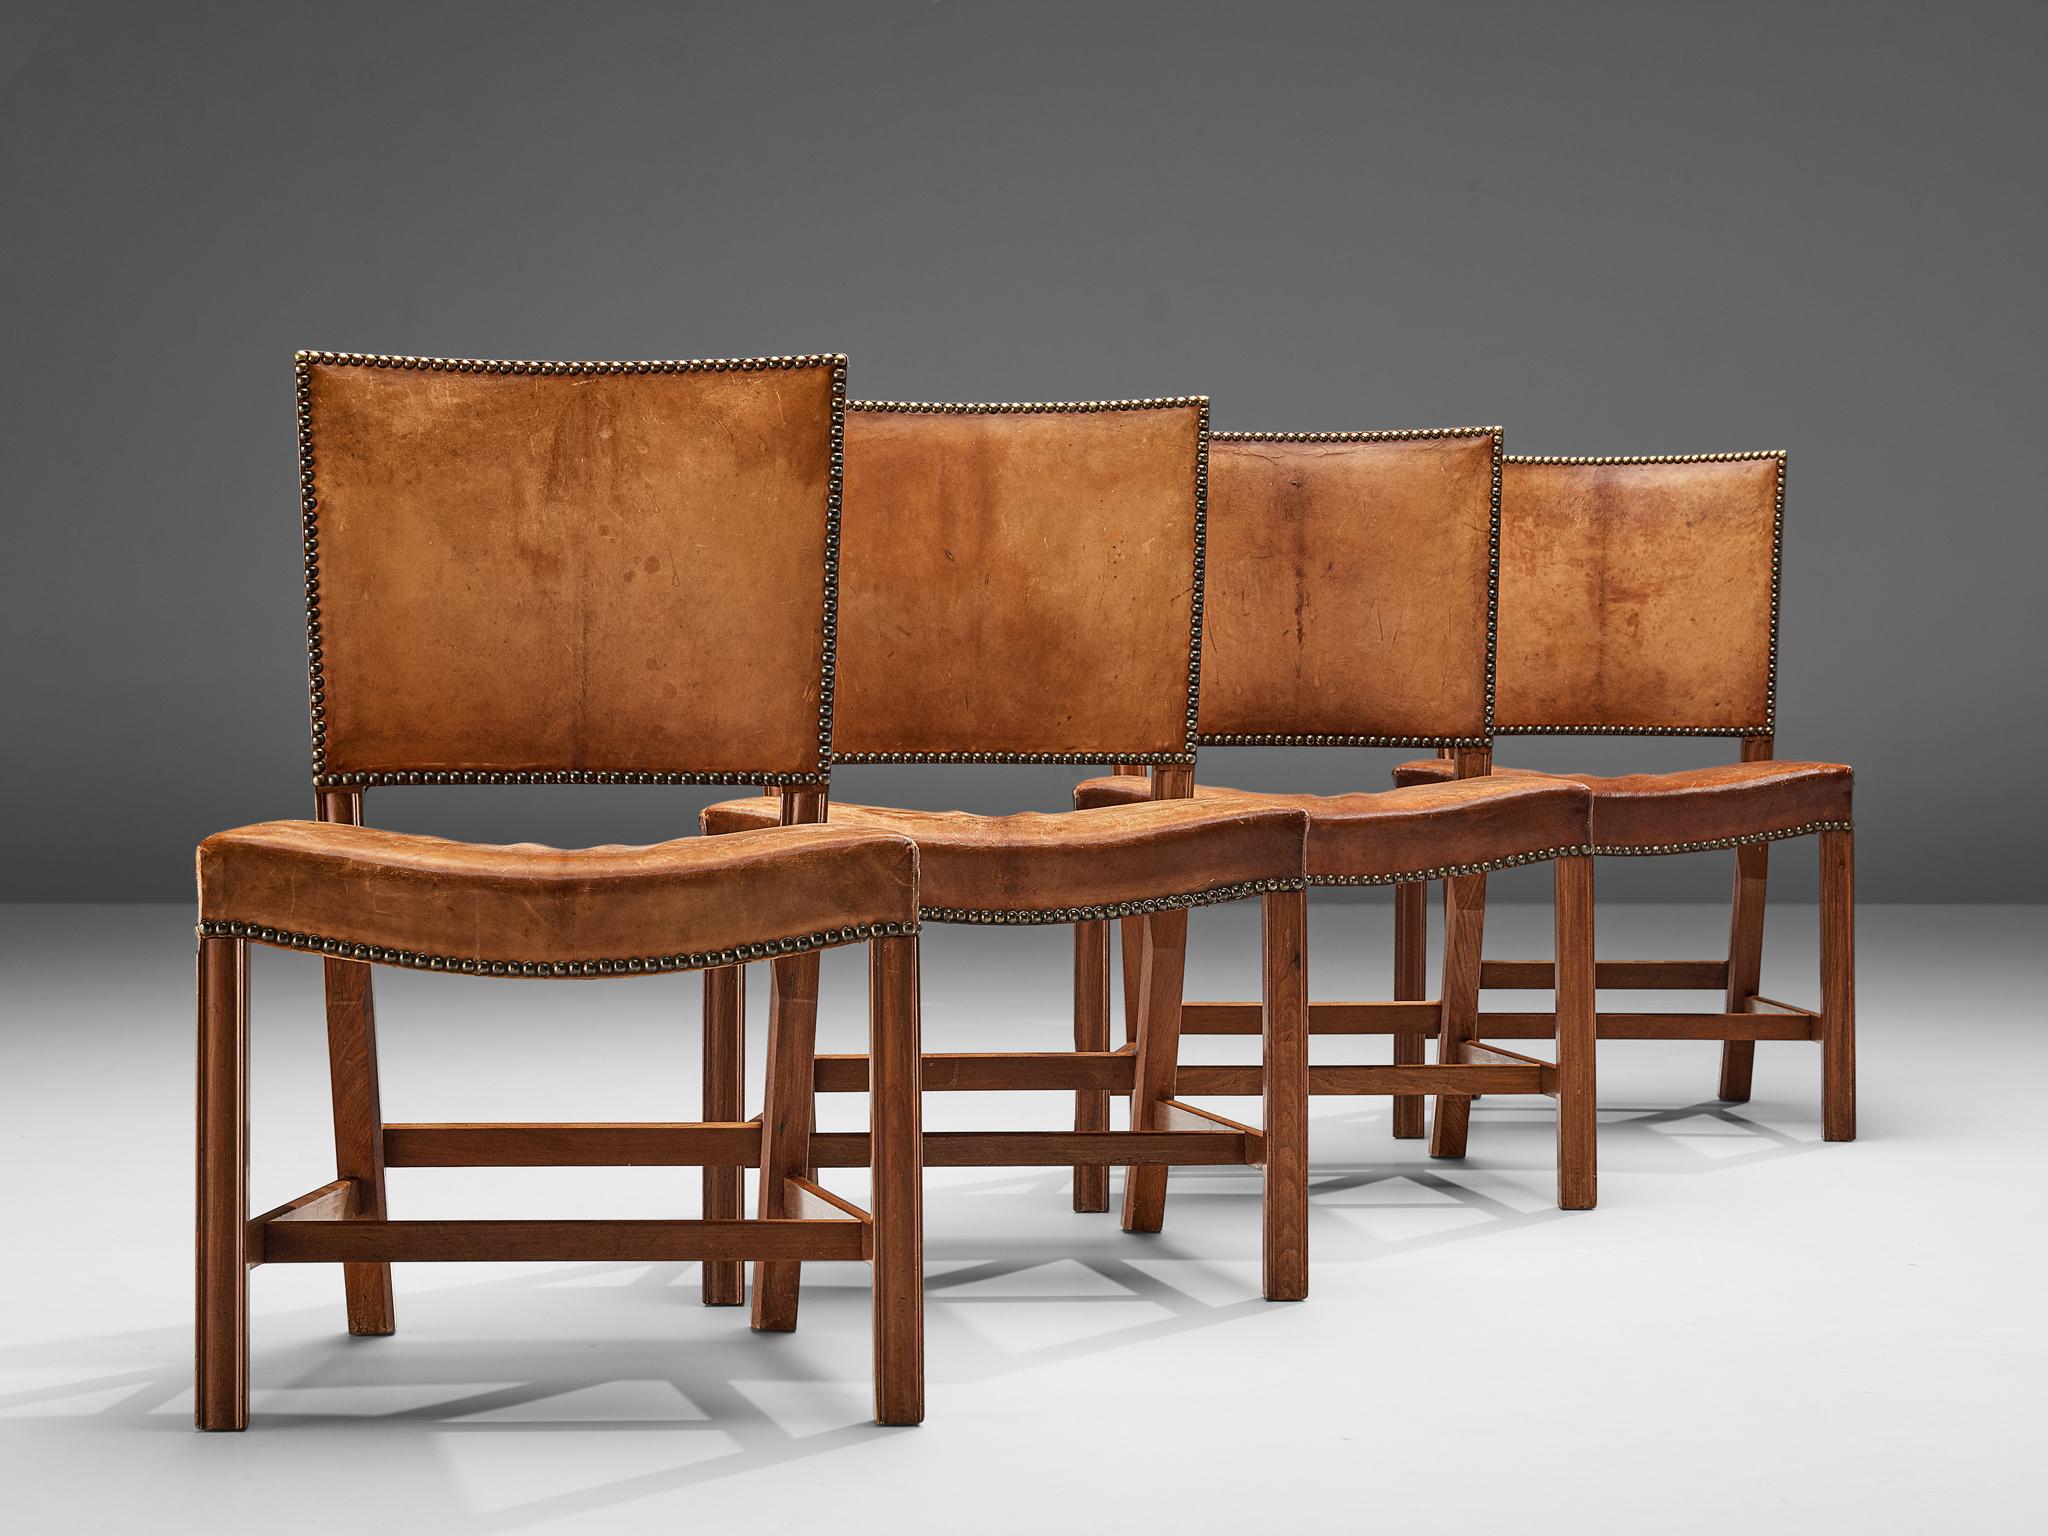 Kaare Klint for Rud Rasmussen, set of four dining chairs 'The Red Chair', model 3758, mahogany, original patinated Niger leather, brass nails, designed 1927, manufactured 1930s.

Set of four dining chairs, designed by Kaare Klint in 1927 and